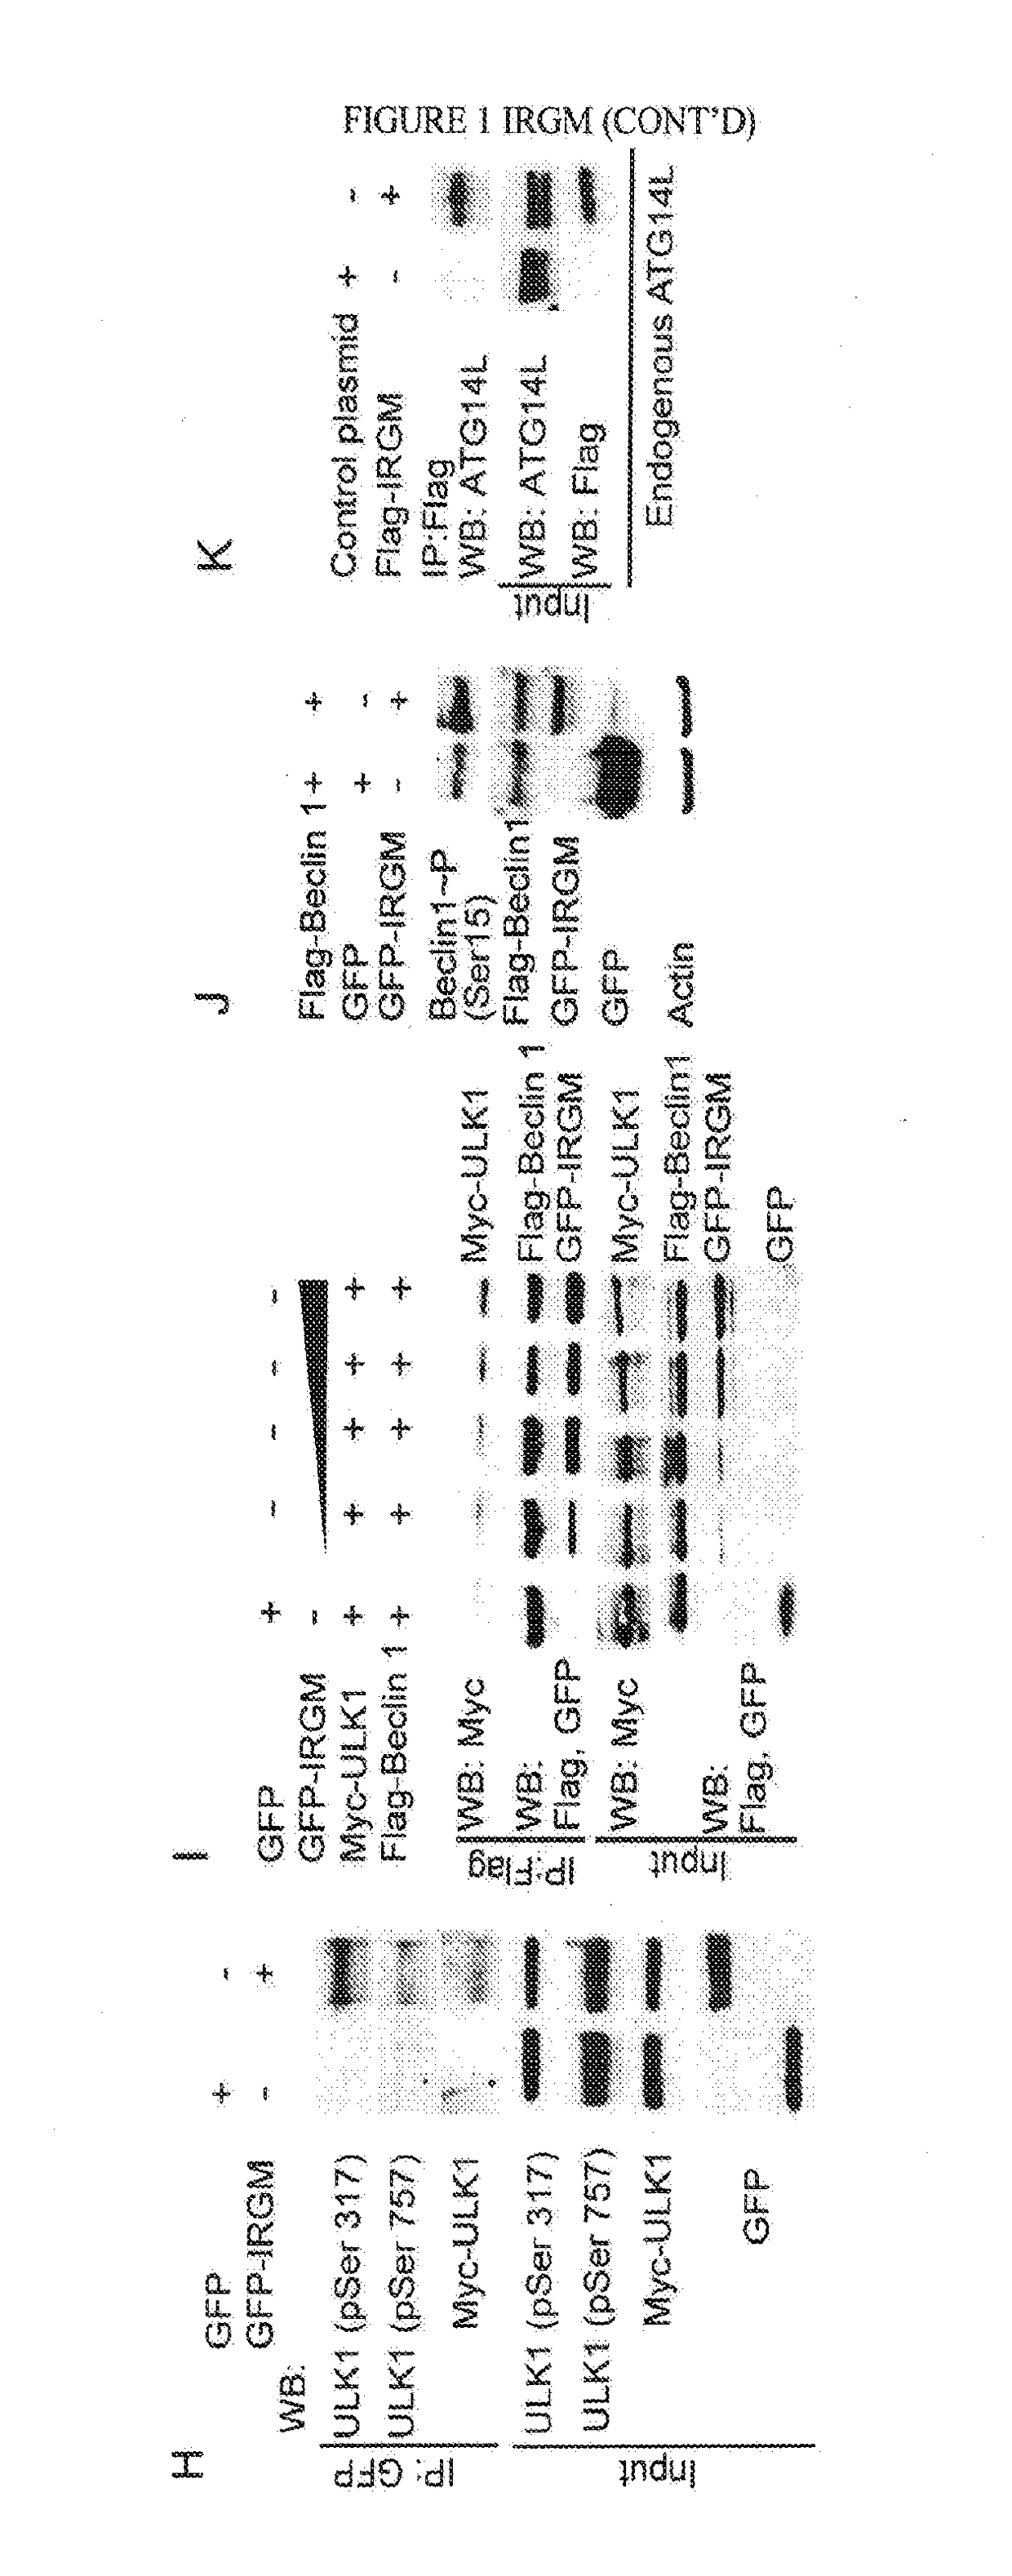 Irgm and precision autophagy controls for antimicrobial and inflammatory disease states and methods of detection of autophagy